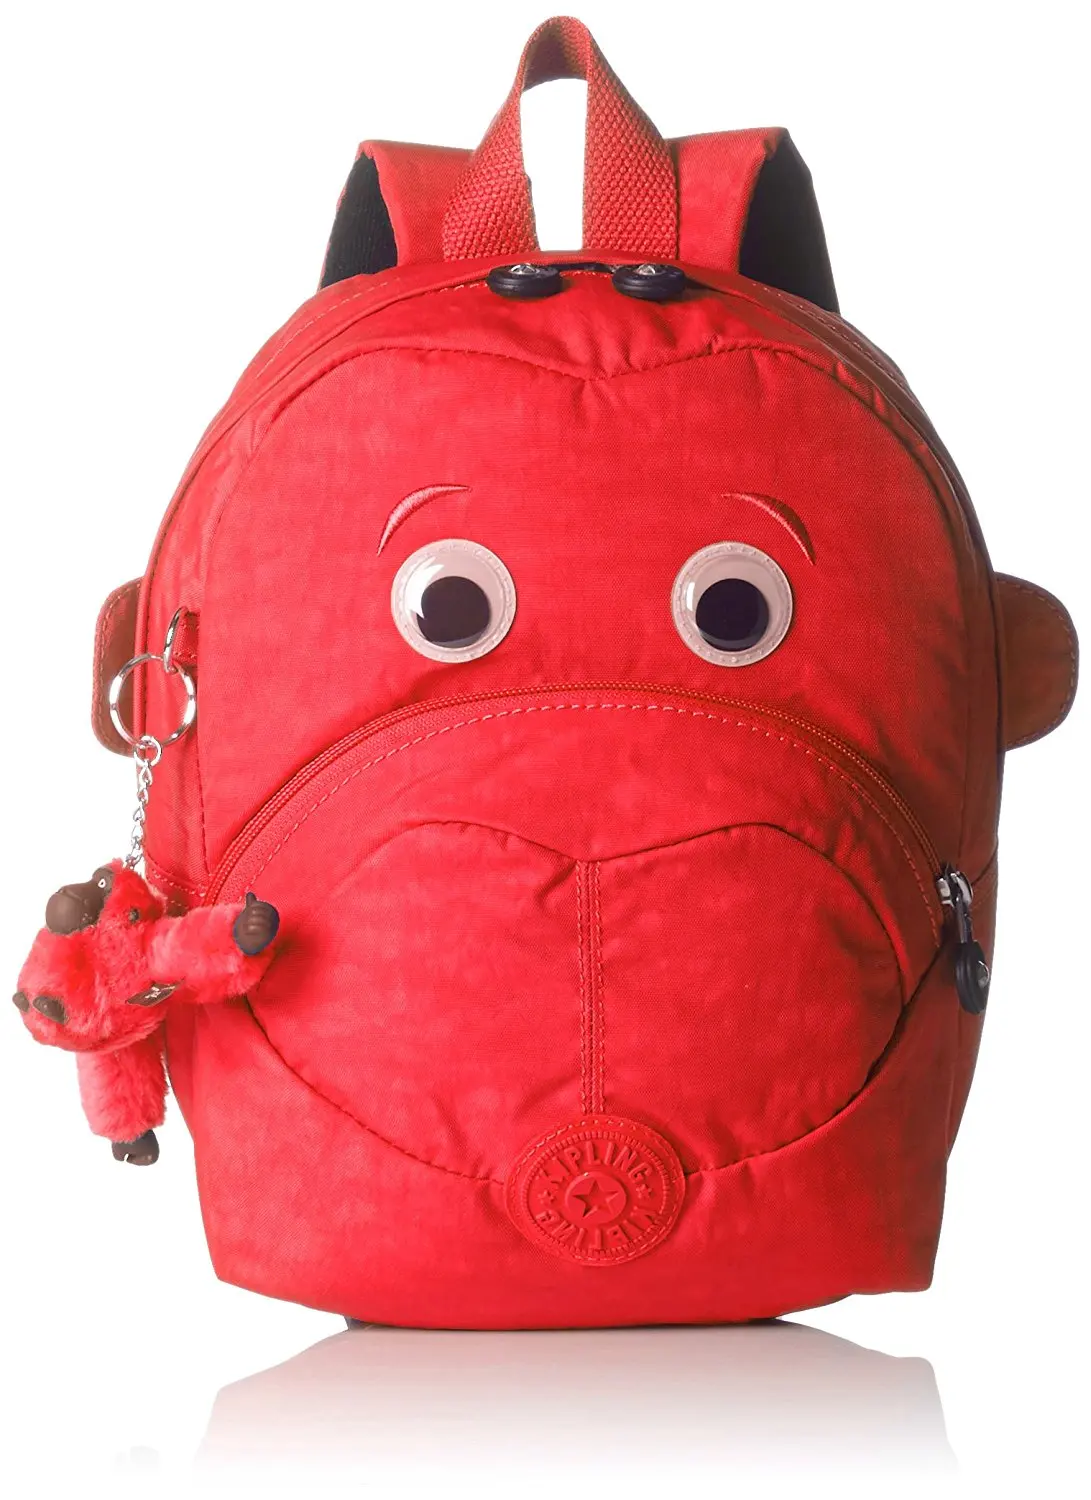 Cheap Red Kids Backpack, find Red Kids Backpack deals on line at ...